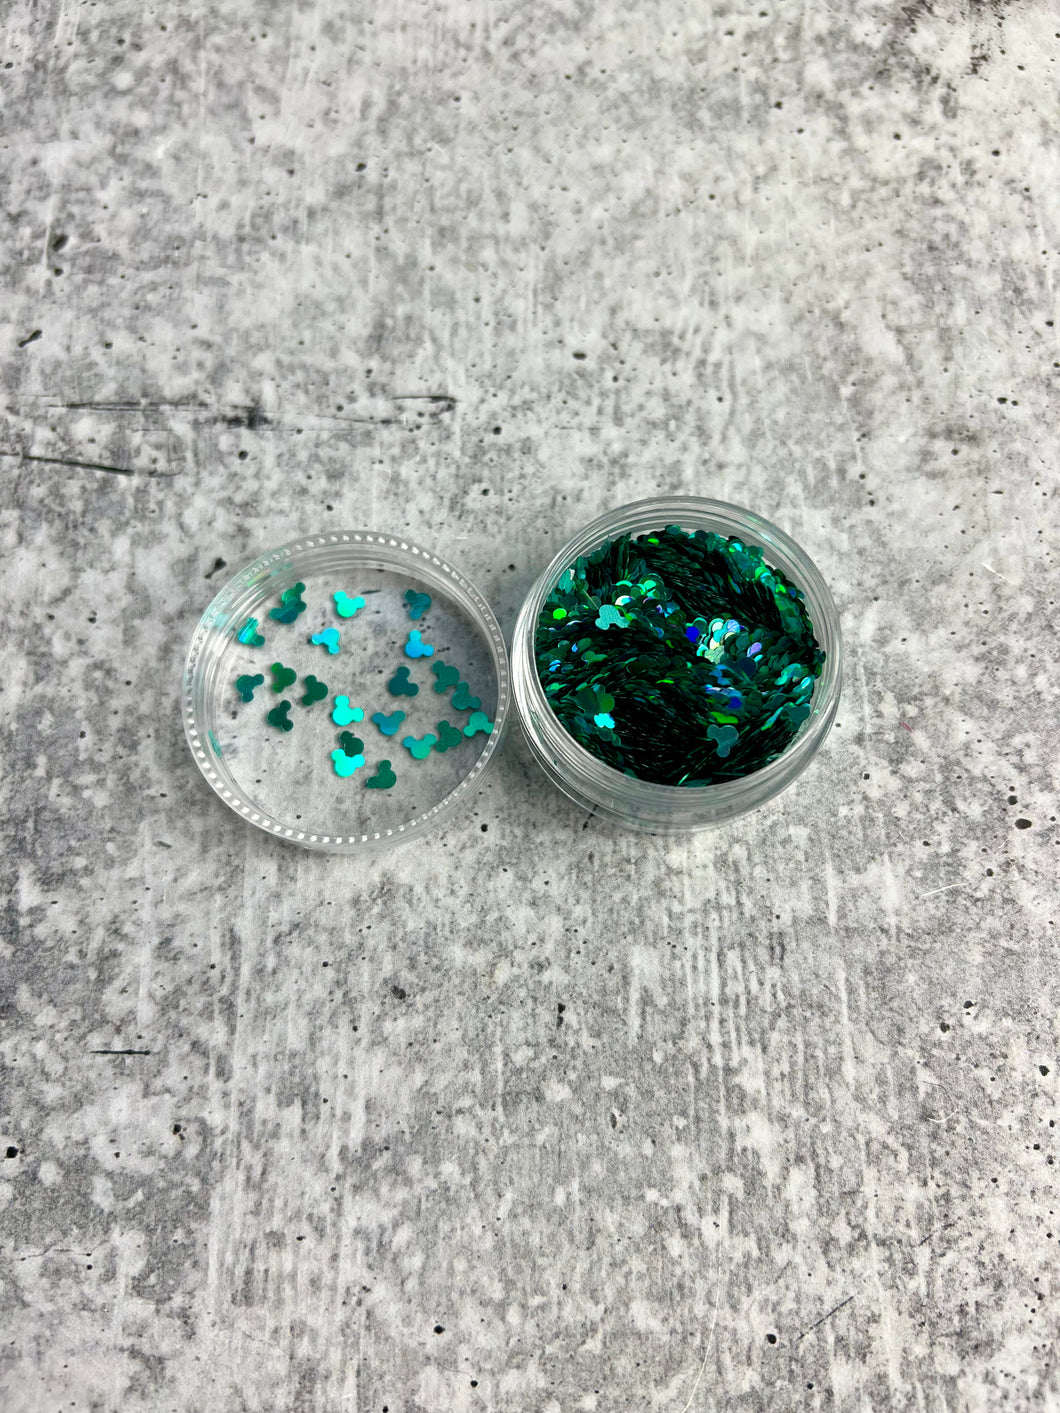 CLEARANCE - TEAL MOUSE GLITTER - 1/2 oz